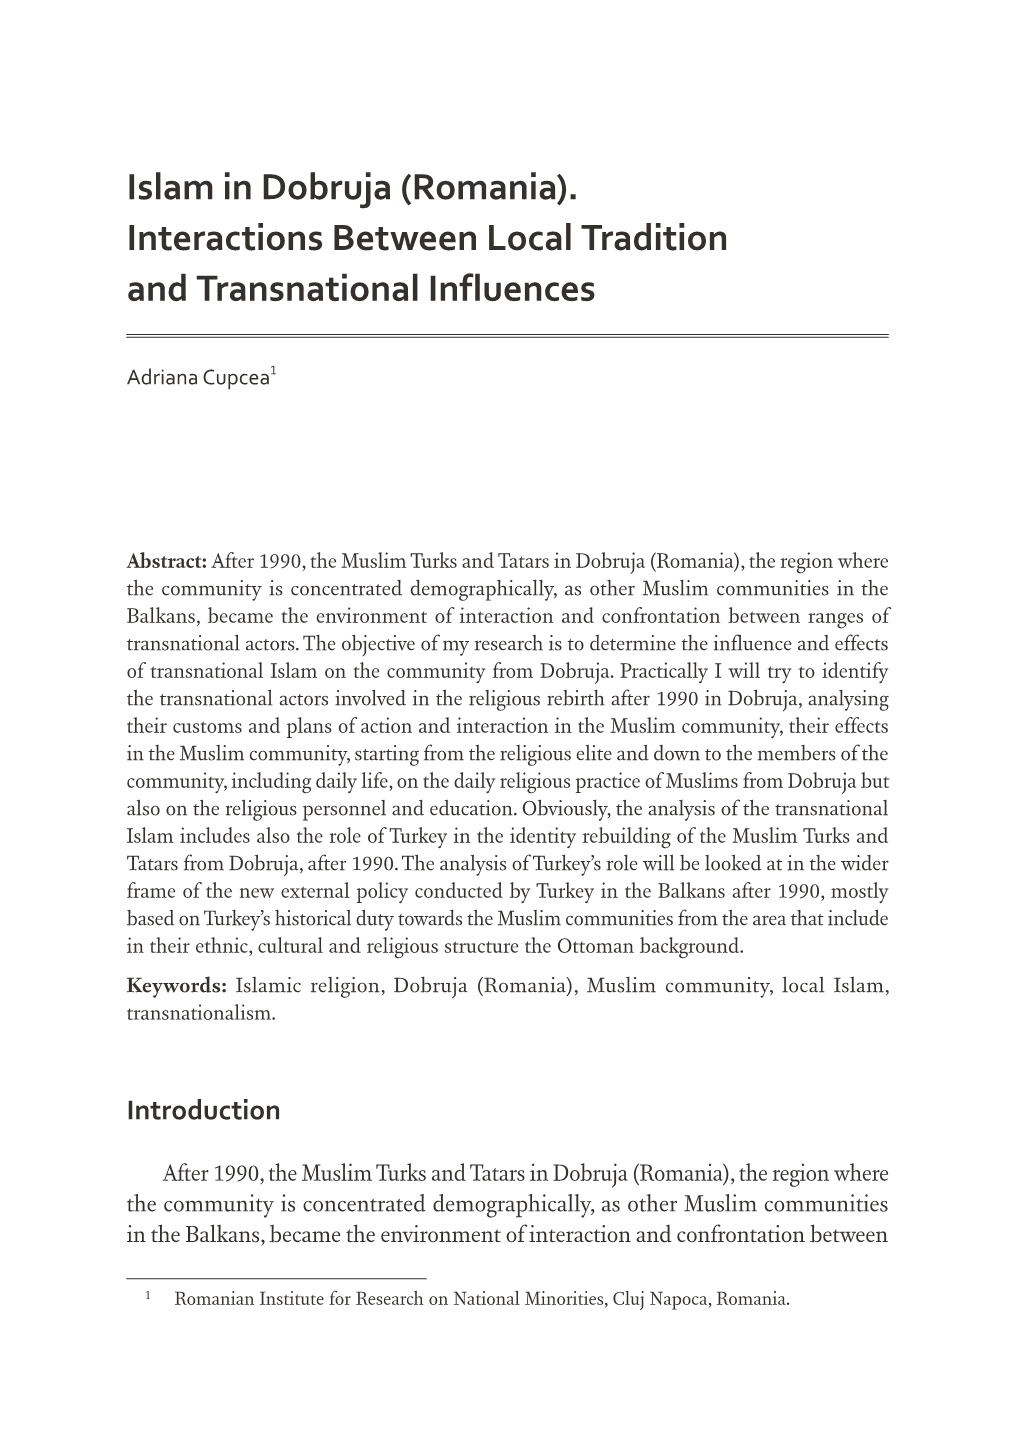 Islam in Dobruja (Romania). Interactions Between Local Tradition and Transnational Influences